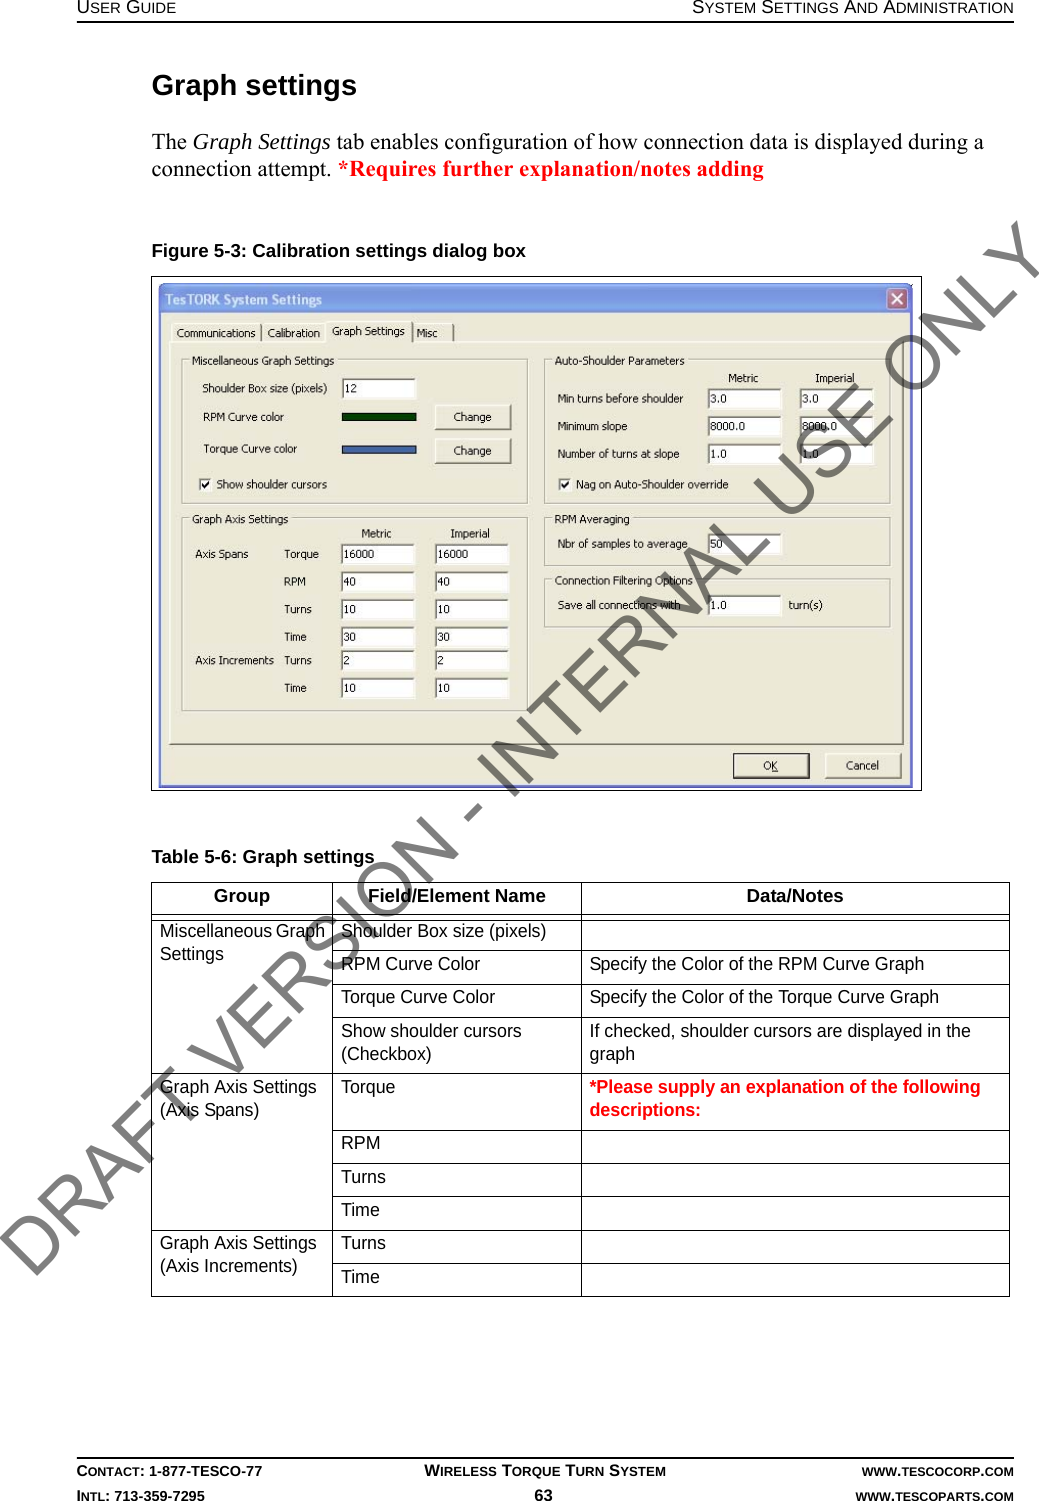 USER GUIDE SYSTEM SETTINGS AND ADMINISTRATIONCONTACT: 1-877-TESCO-77 WIRELESS TORQUE TURN SYSTEM WWW.TESCOCORP.COMINTL: 713-359-7295 63    WWW.TESCOPARTS.COMGraph settingsThe Graph Settings tab enables configuration of how connection data is displayed during a connection attempt. *Requires further explanation/notes adding  Figure 5-3: Calibration settings dialog boxTable 5-6: Graph settingsGroup Field/Element Name Data/NotesMiscellaneous Graph Settings Shoulder Box size (pixels)RPM Curve Color Specify the Color of the RPM Curve GraphTorque Curve Color Specify the Color of the Torque Curve GraphShow shoulder cursors(Checkbox) If checked, shoulder cursors are displayed in the graphGraph Axis Settings(Axis Spans) Torque*Please supply an explanation of the following descriptions:RPMTurnsTimeGraph Axis Settings(Axis Increments) TurnsTimeDRAFT VERSION - INTERNAL USE ONLY